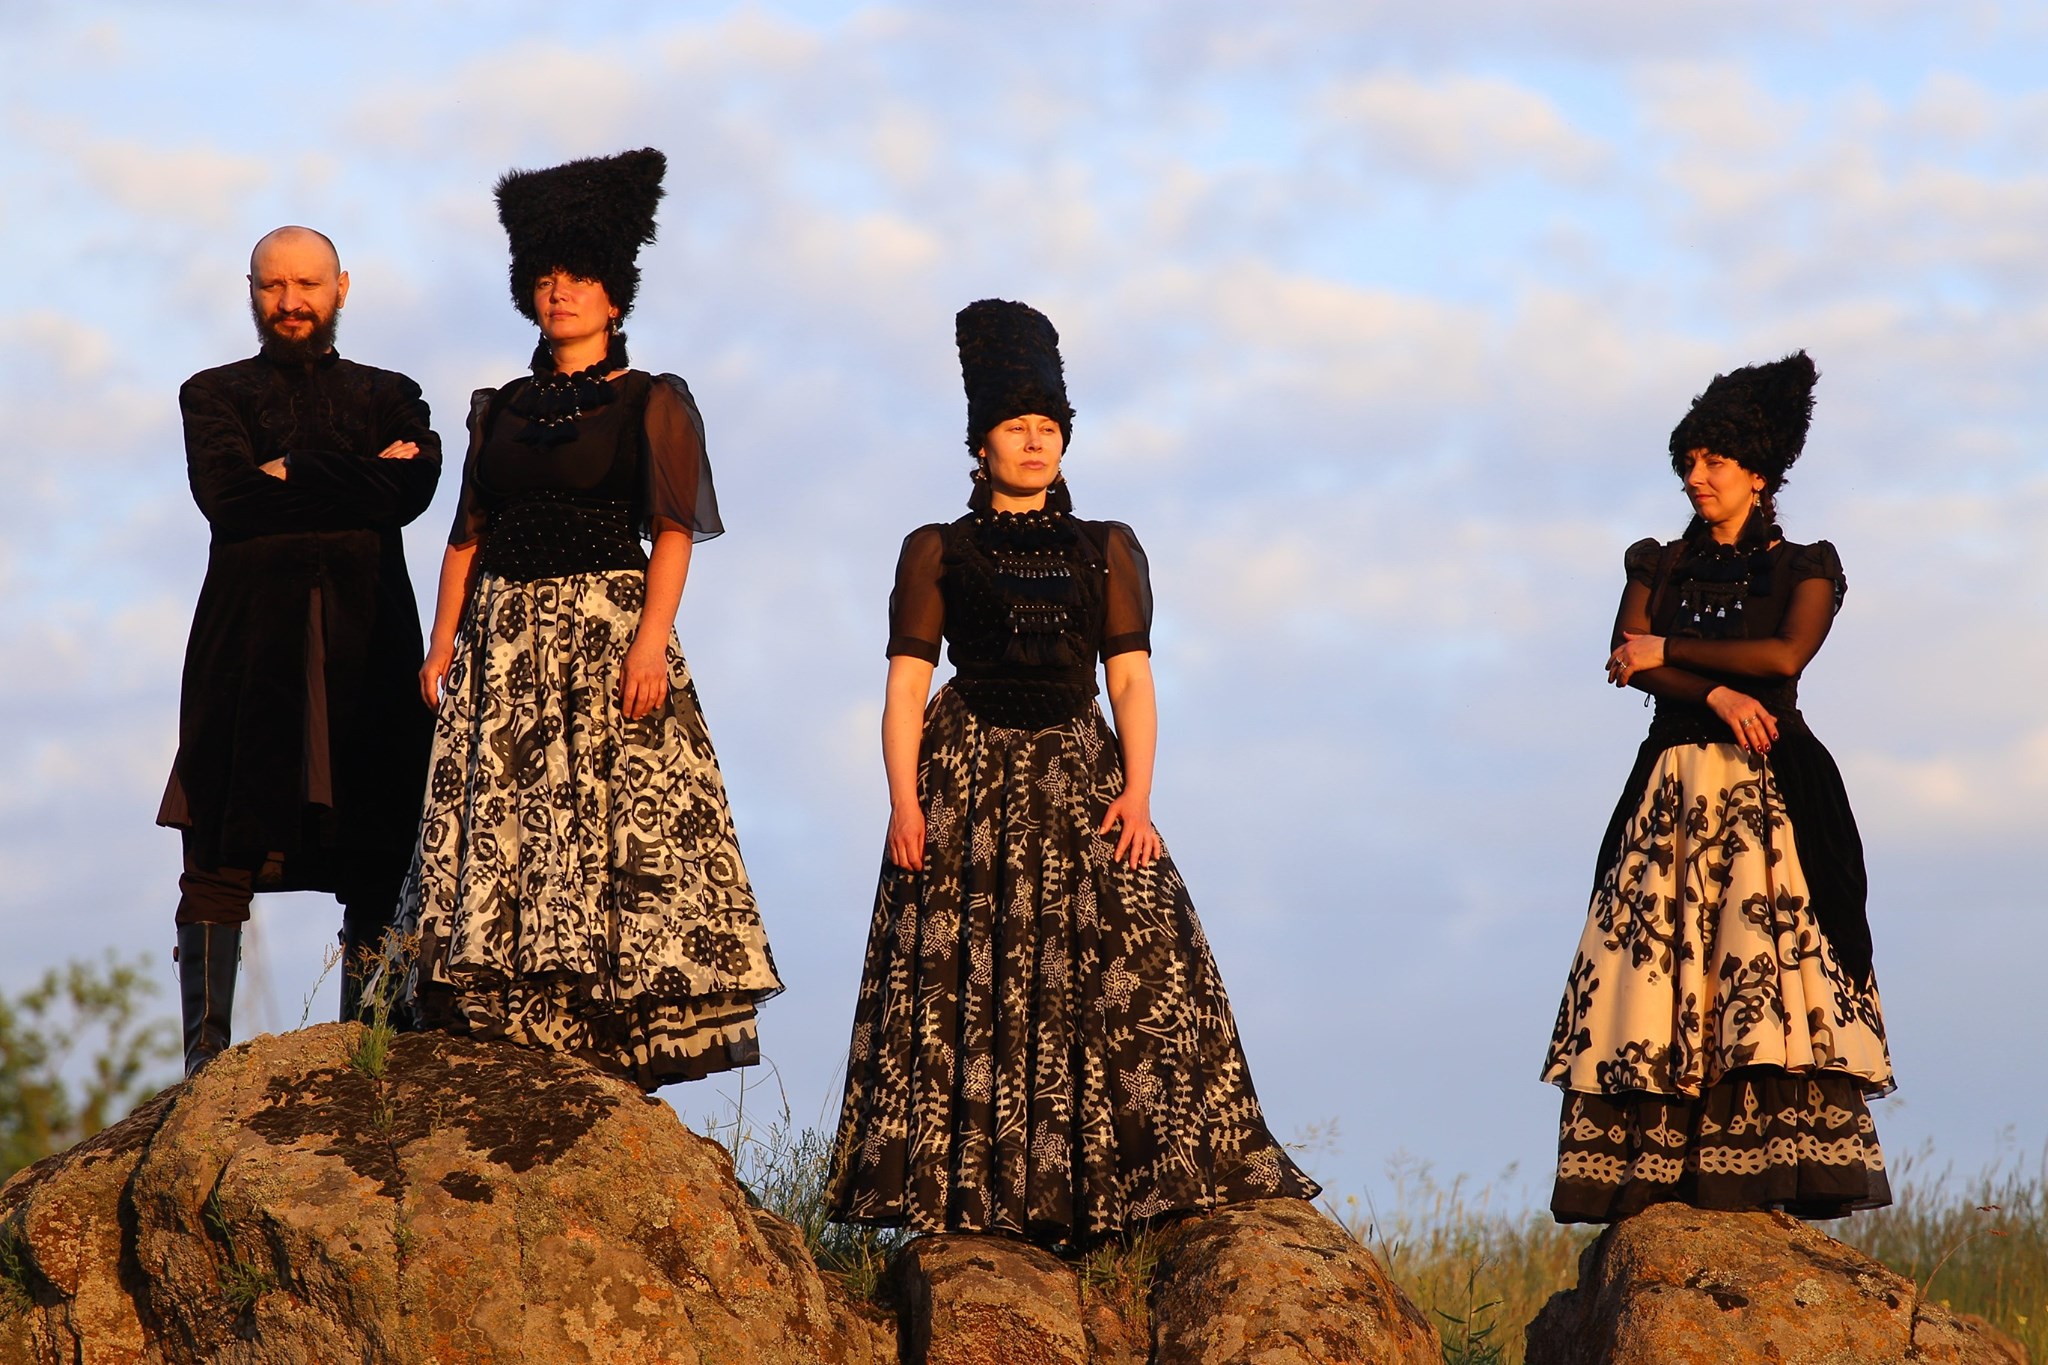 Postcards from Ukraine: DakhaBrakha narrated the story of the Ascension Church in the Chernihiv region